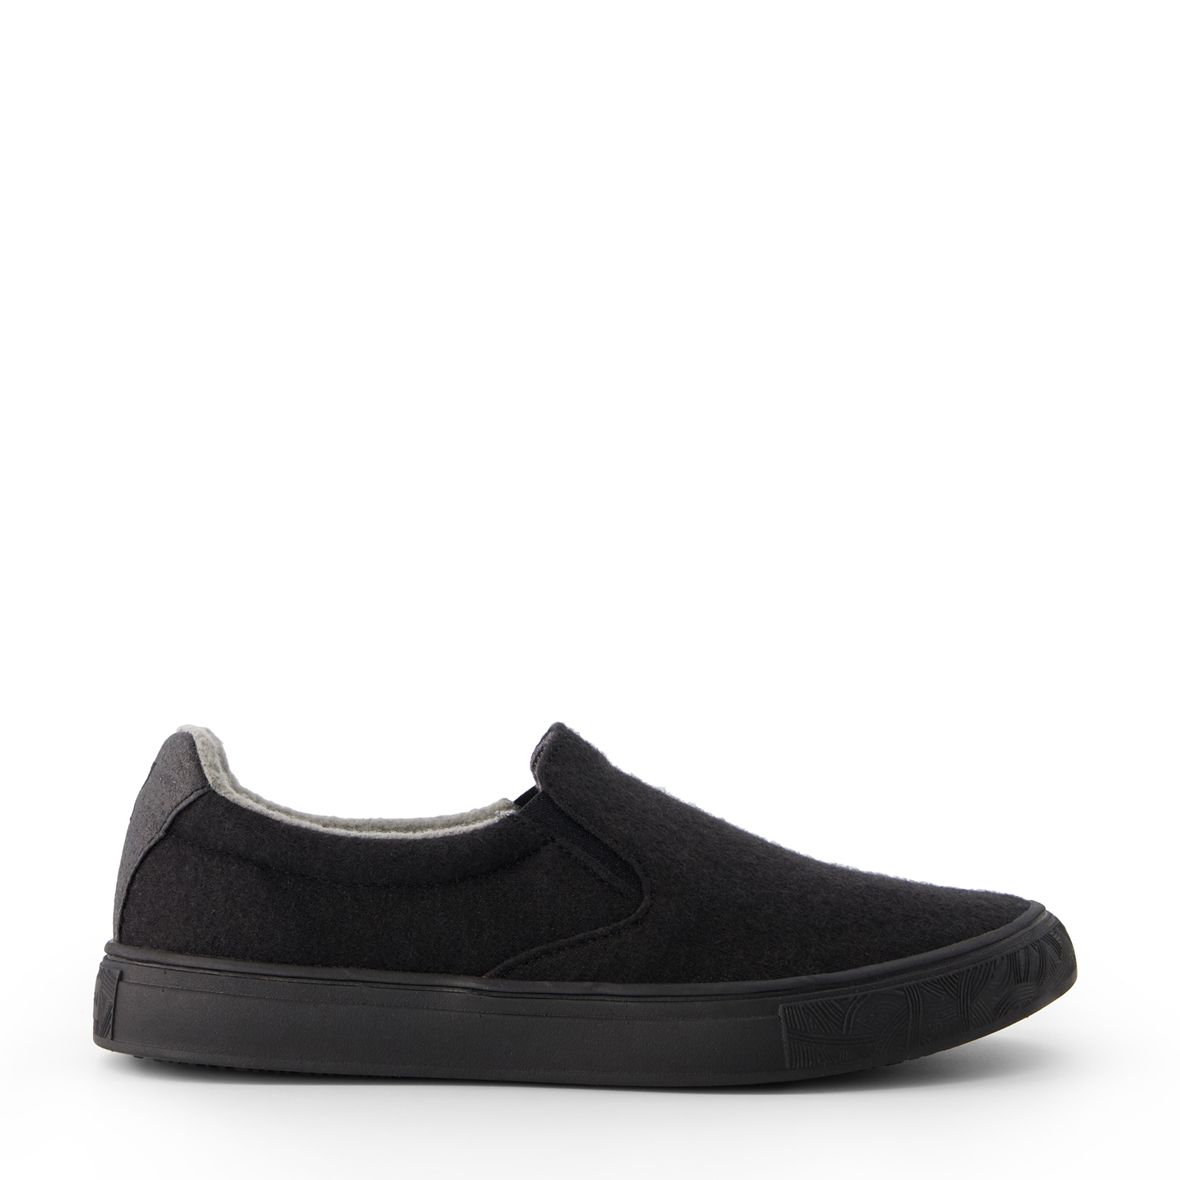 Buy NIMBO WOOL Black / Black casuals Online at Shoe Connection